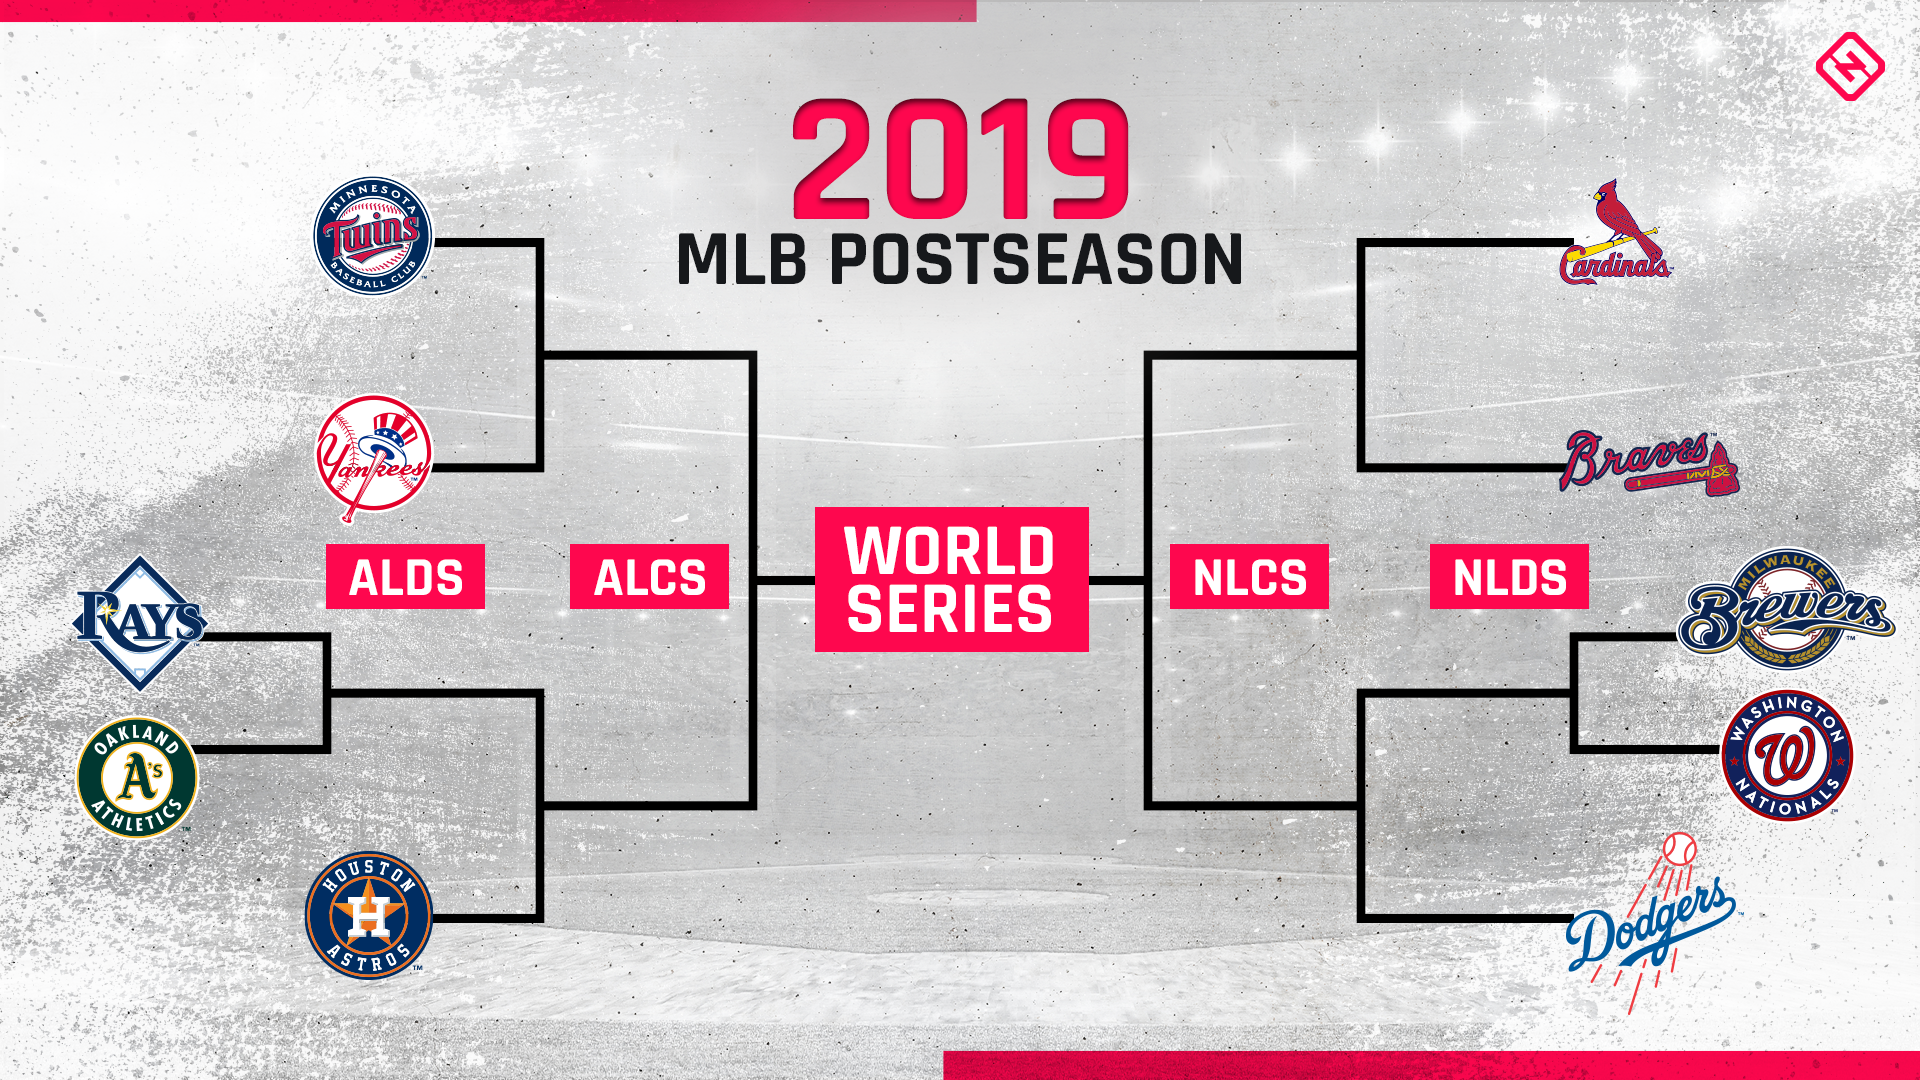 MLB playoffs schedule 2019: Full bracket, dates, times, TV channels for ALCS, NLCS ...